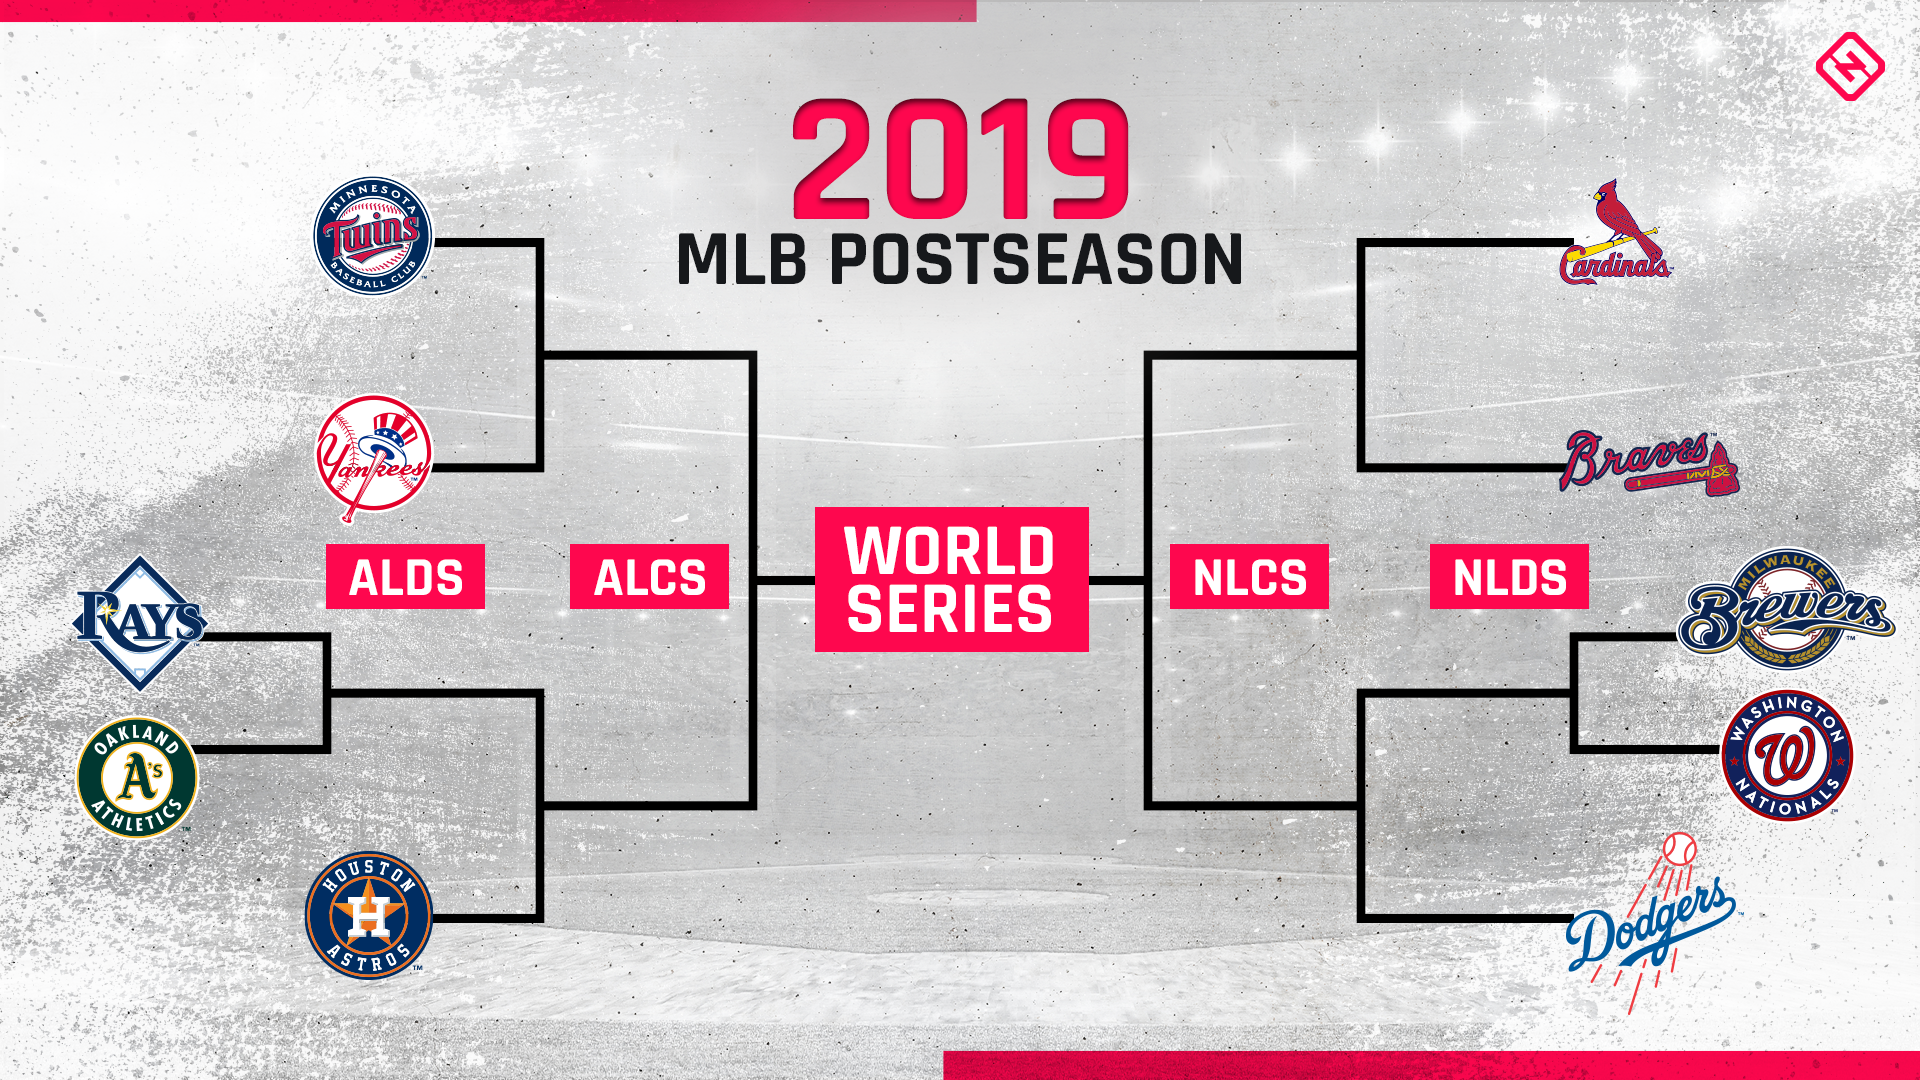 MLB playoffs schedule 2019: Full bracket, dates, times, TV channels for ALCS, NLCS ...